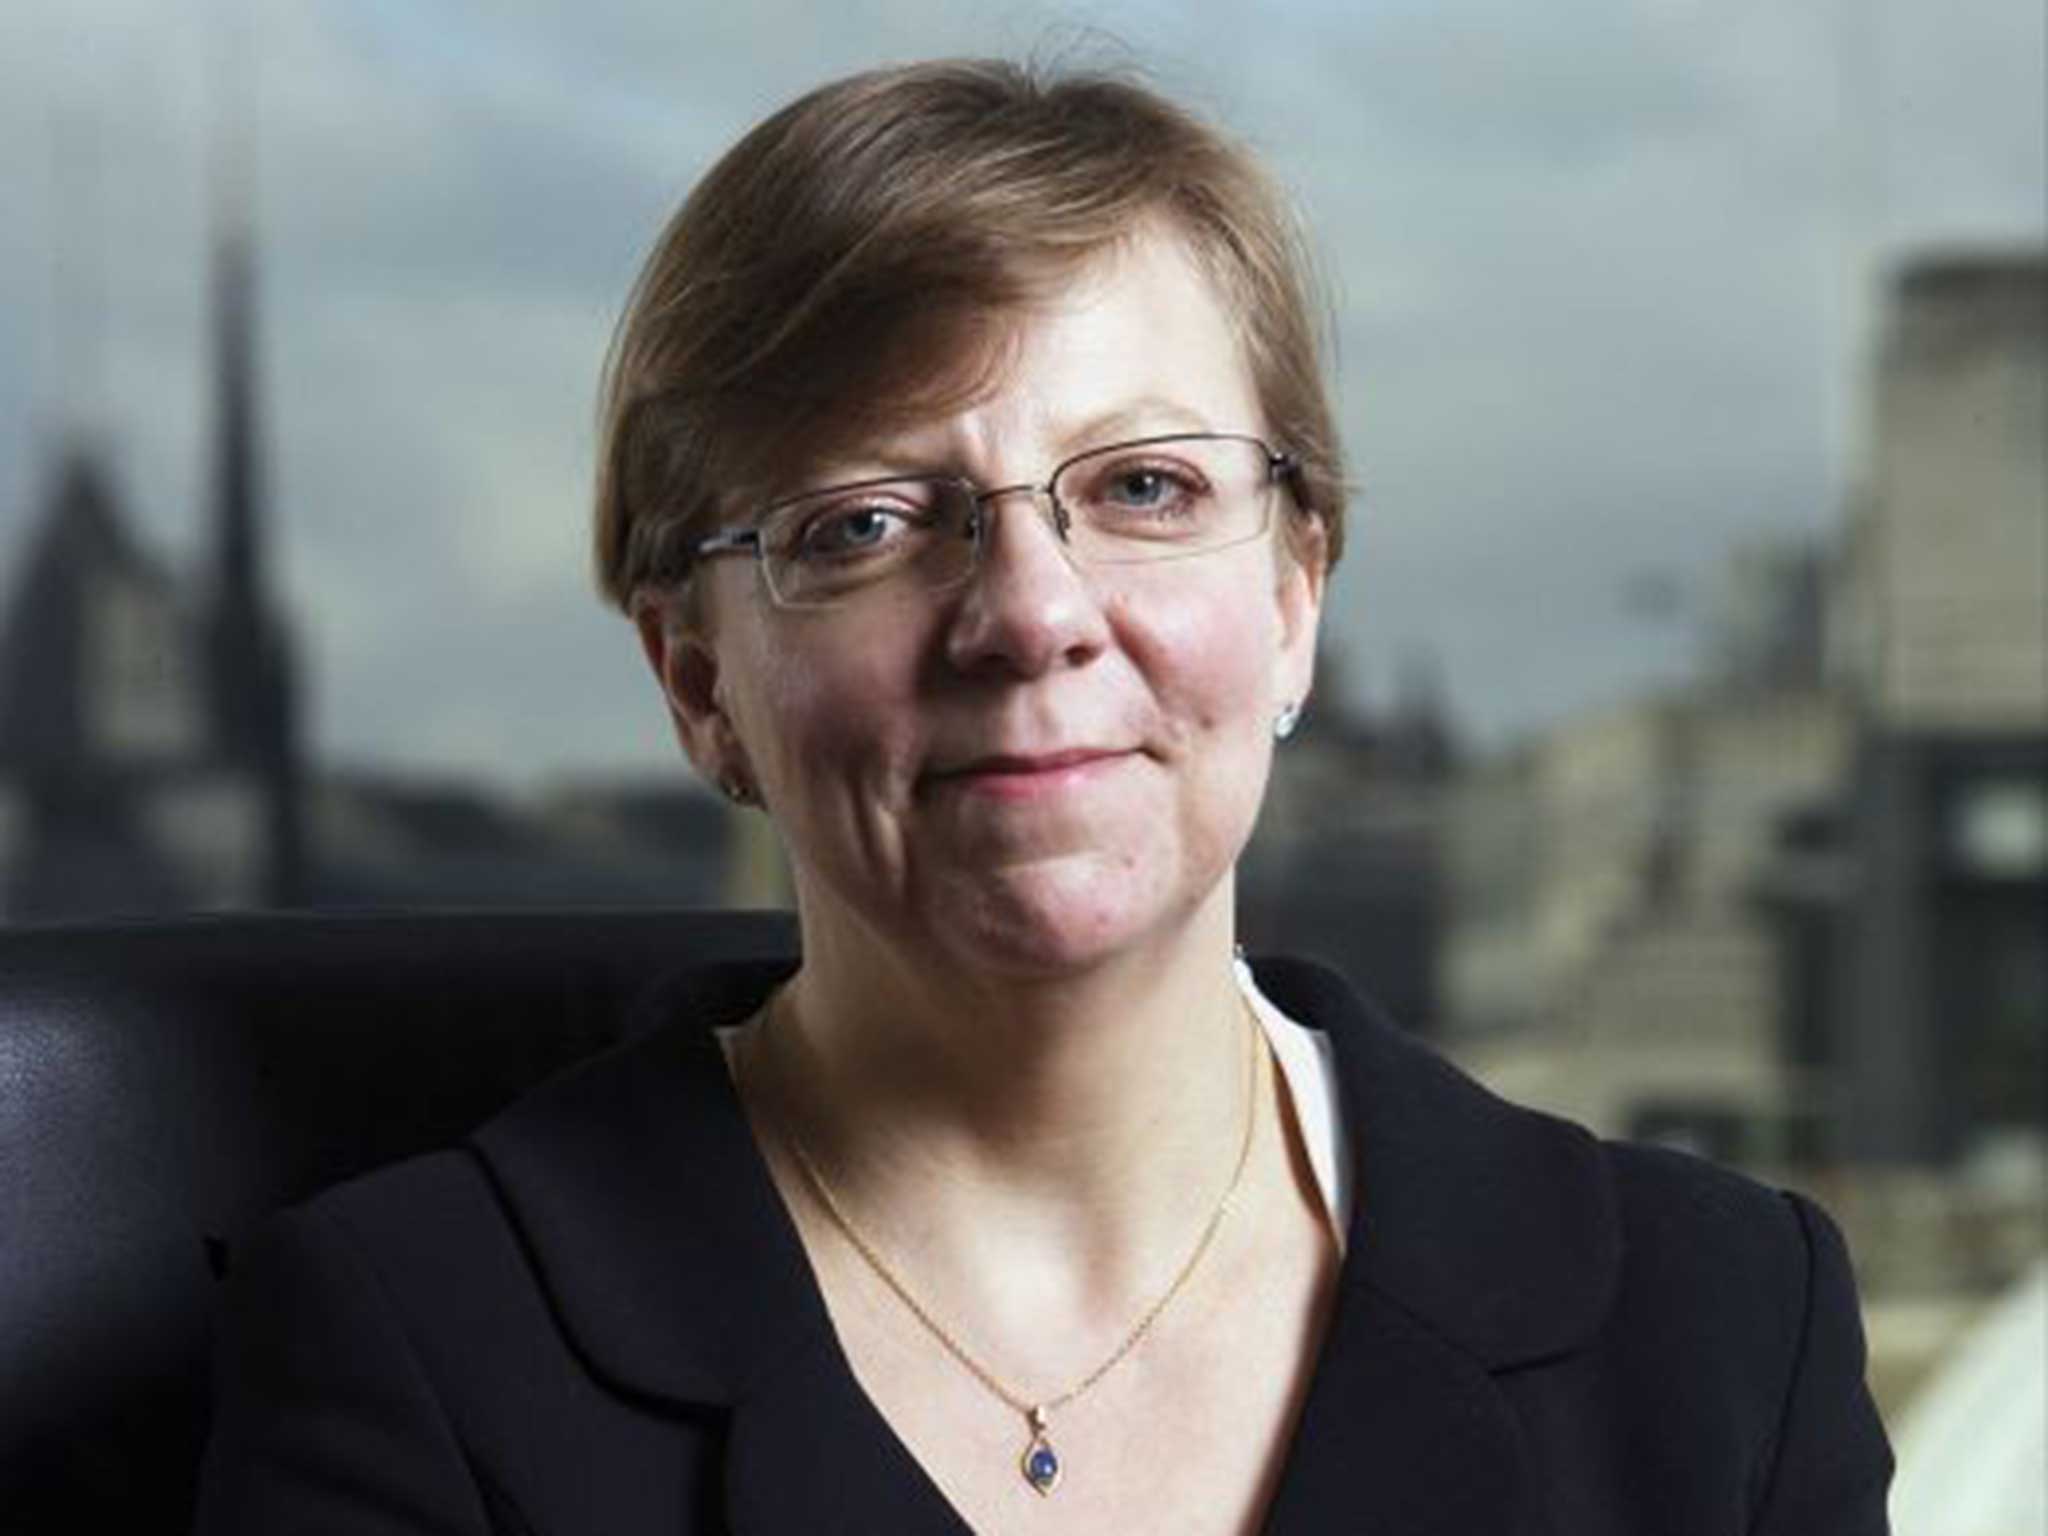 Alison Saunders said as well as being able to prosecute rape cases where there has been an offence, prosecutors must look at whether the suspect had a reasonable belief in consent